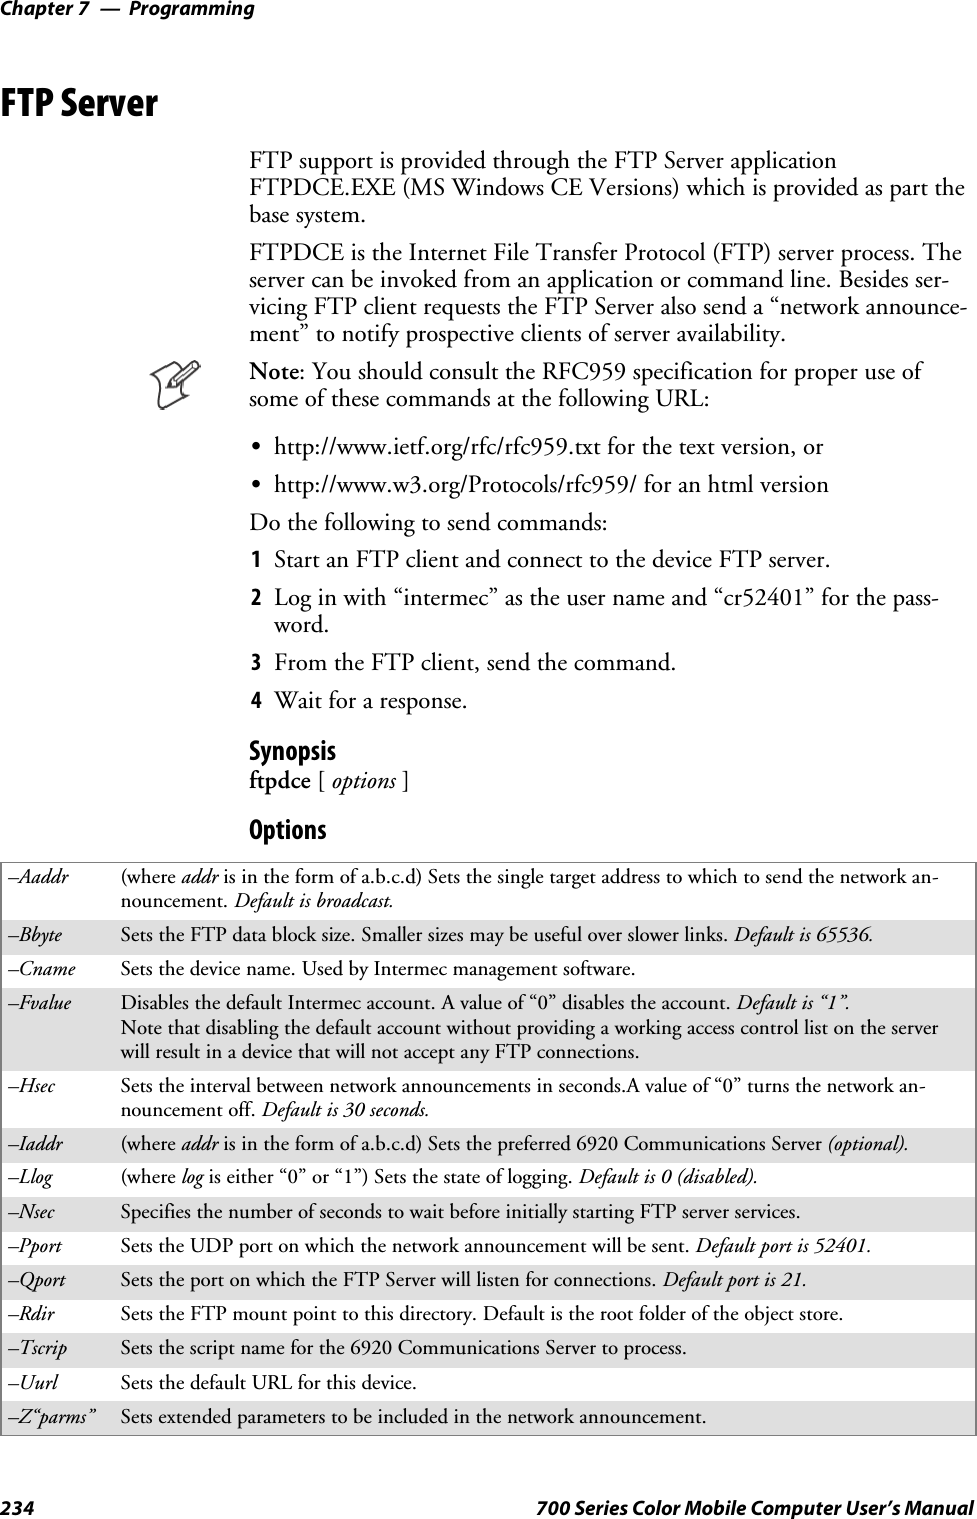 ProgrammingChapter —7234 700 Series Color Mobile Computer User’s ManualFTP ServerFTP support is provided through the FTP Server applicationFTPDCE.EXE (MS Windows CE Versions) which is provided as part thebase system.FTPDCE is the Internet File Transfer Protocol (FTP) server process. Theserver can be invoked from an application or command line. Besides ser-vicing FTP client requests the FTP Server also send a “network announce-ment” to notify prospective clients of server availability.Note: You should consult the RFC959 specification for proper use ofsome of these commands at the following URL:Shttp://www.ietf.org/rfc/rfc959.txt for the text version, orShttp://www.w3.org/Protocols/rfc959/ for an html versionDo the following to send commands:1Start an FTP client and connect to the device FTP server.2Log in with “intermec” as the user name and “cr52401” for the pass-word.3From the FTP client, send the command.4Wait for a response.Synopsisftpdce [options ]Options–Aaddr (where addr is in the form of a.b.c.d) Sets the single target address to which to send the network an-nouncement. Default is broadcast.–Bbyte Sets the FTP data block size. Smaller sizes may be useful over slower links. Default is 65536.–Cname Sets the device name. Used by Intermec management software.–Fvalue Disables the default Intermec account. A value of “0” disables the account. Default is “1”.Note that disabling the default account without providing a working access control list on the serverwill result in a device that will not accept any FTP connections.–Hsec Sets the interval between network announcements in seconds.A value of “0” turns the network an-nouncement off. Default is 30 seconds.–Iaddr (where addr is in the form of a.b.c.d) Sets the preferred 6920 Communications Server (optional).–Llog (where log is either “0” or “1”) Sets the state of logging. Default is 0 (disabled).–Nsec Specifies the number of seconds to wait before initially starting FTP server services.–Pport Sets the UDP port on which the network announcement will be sent. Default port is 52401.–Qport Sets the port on which the FTP Server will listen for connections. Defaultportis21.–Rdir Sets the FTP mount point to this directory. Default is the root folder of the object store.–Tscrip Sets the script name for the 6920 Communications Server to process.–Uurl Sets the default URL for this device.–Z“parms” Sets extended parameters to be included in the network announcement.